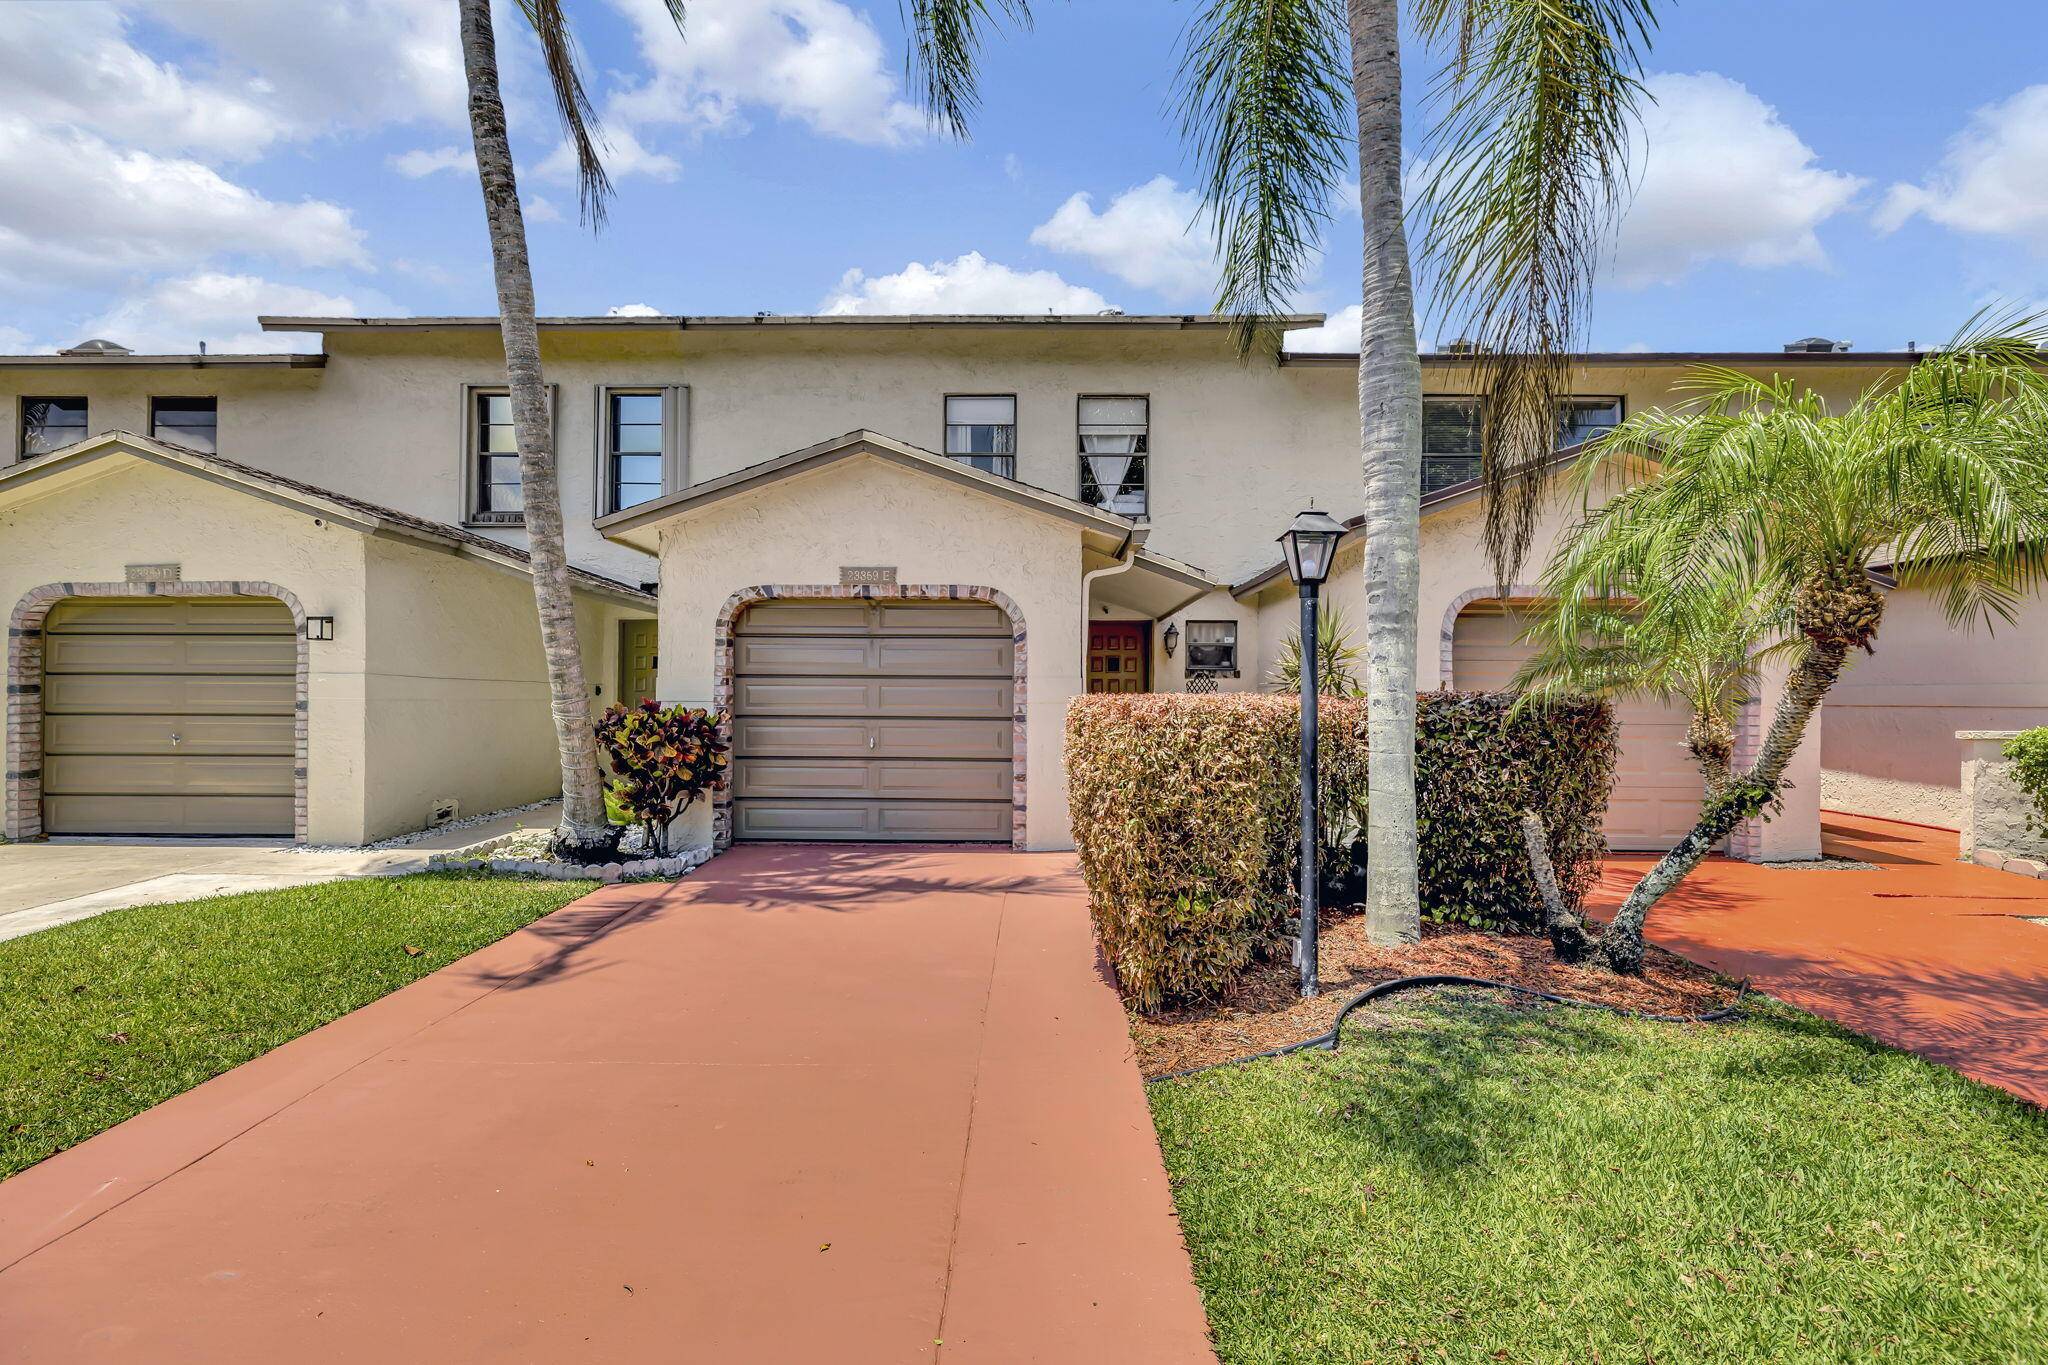 Amazing 3 bedrooms, 2 1 2 bathrooms townhouse in the great Village of Boca Barwood.